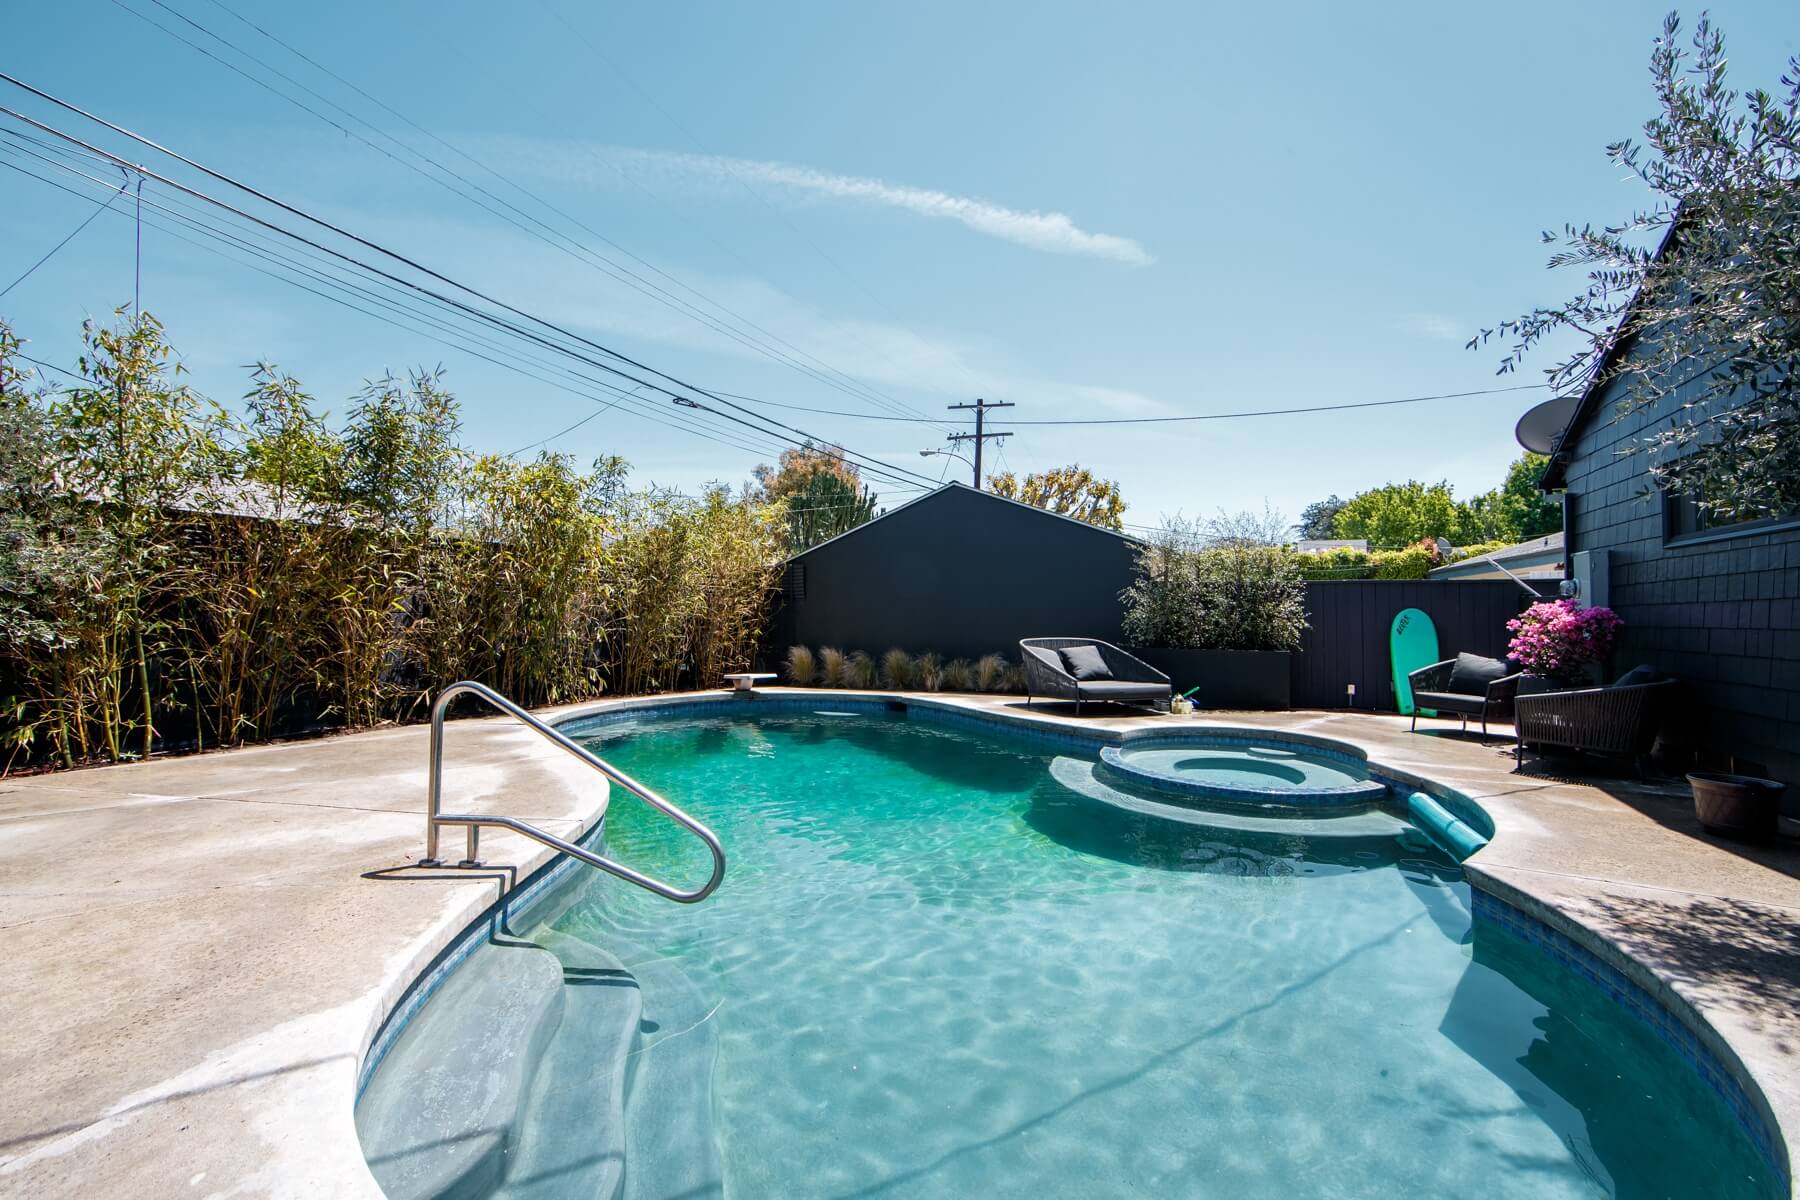 in-ground pool at our women's sober living home near Santa Monica, CA